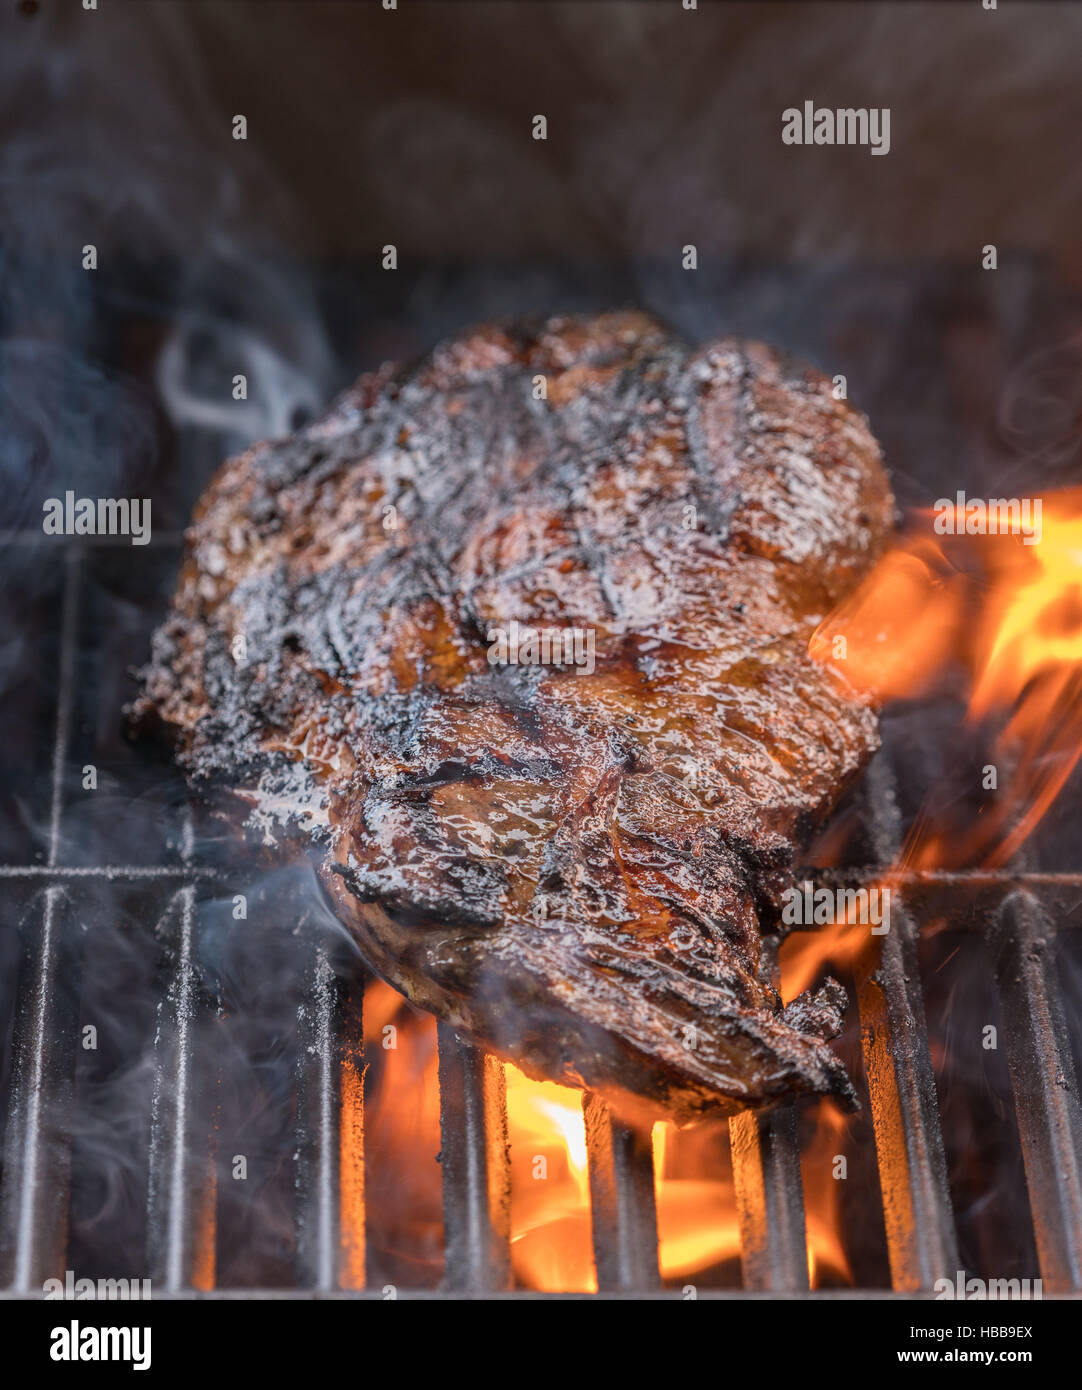 Large fillet of beef flaming on barbeque Stock Photo